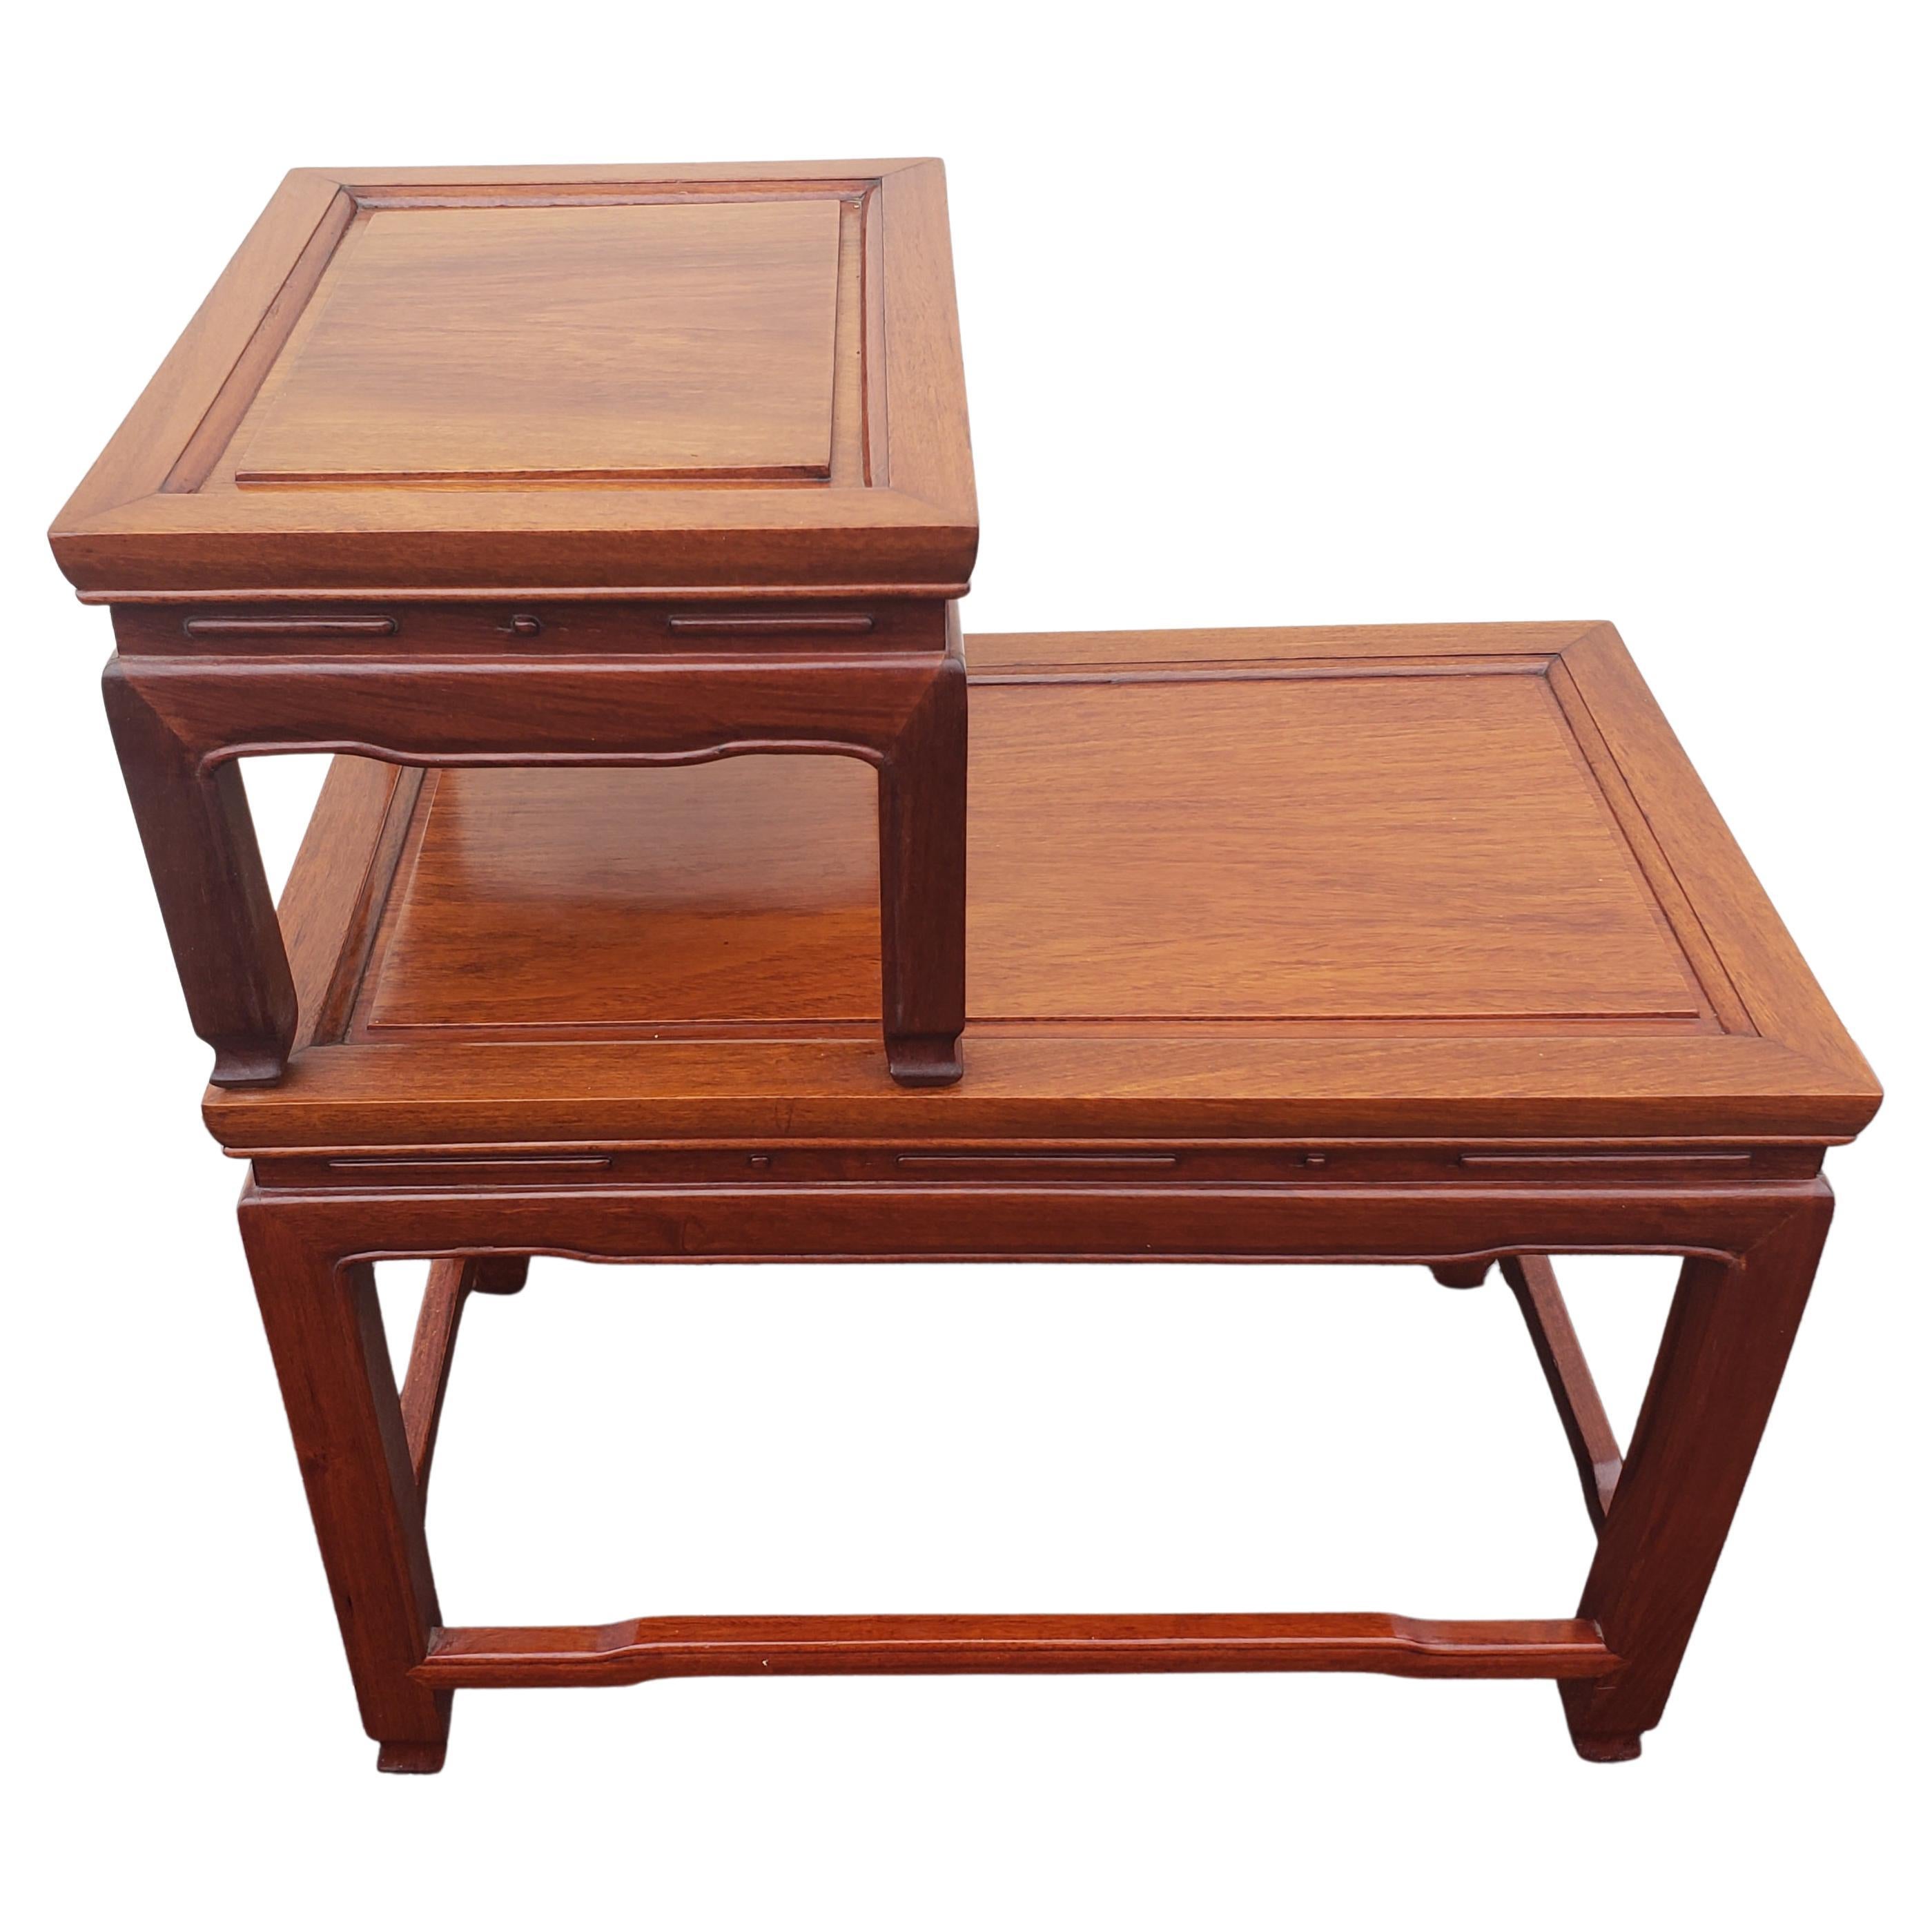 Hong Kong George Zee Ming Style Carved Rosewood One Drawer 2 Tier End Tables, Circa 1960s